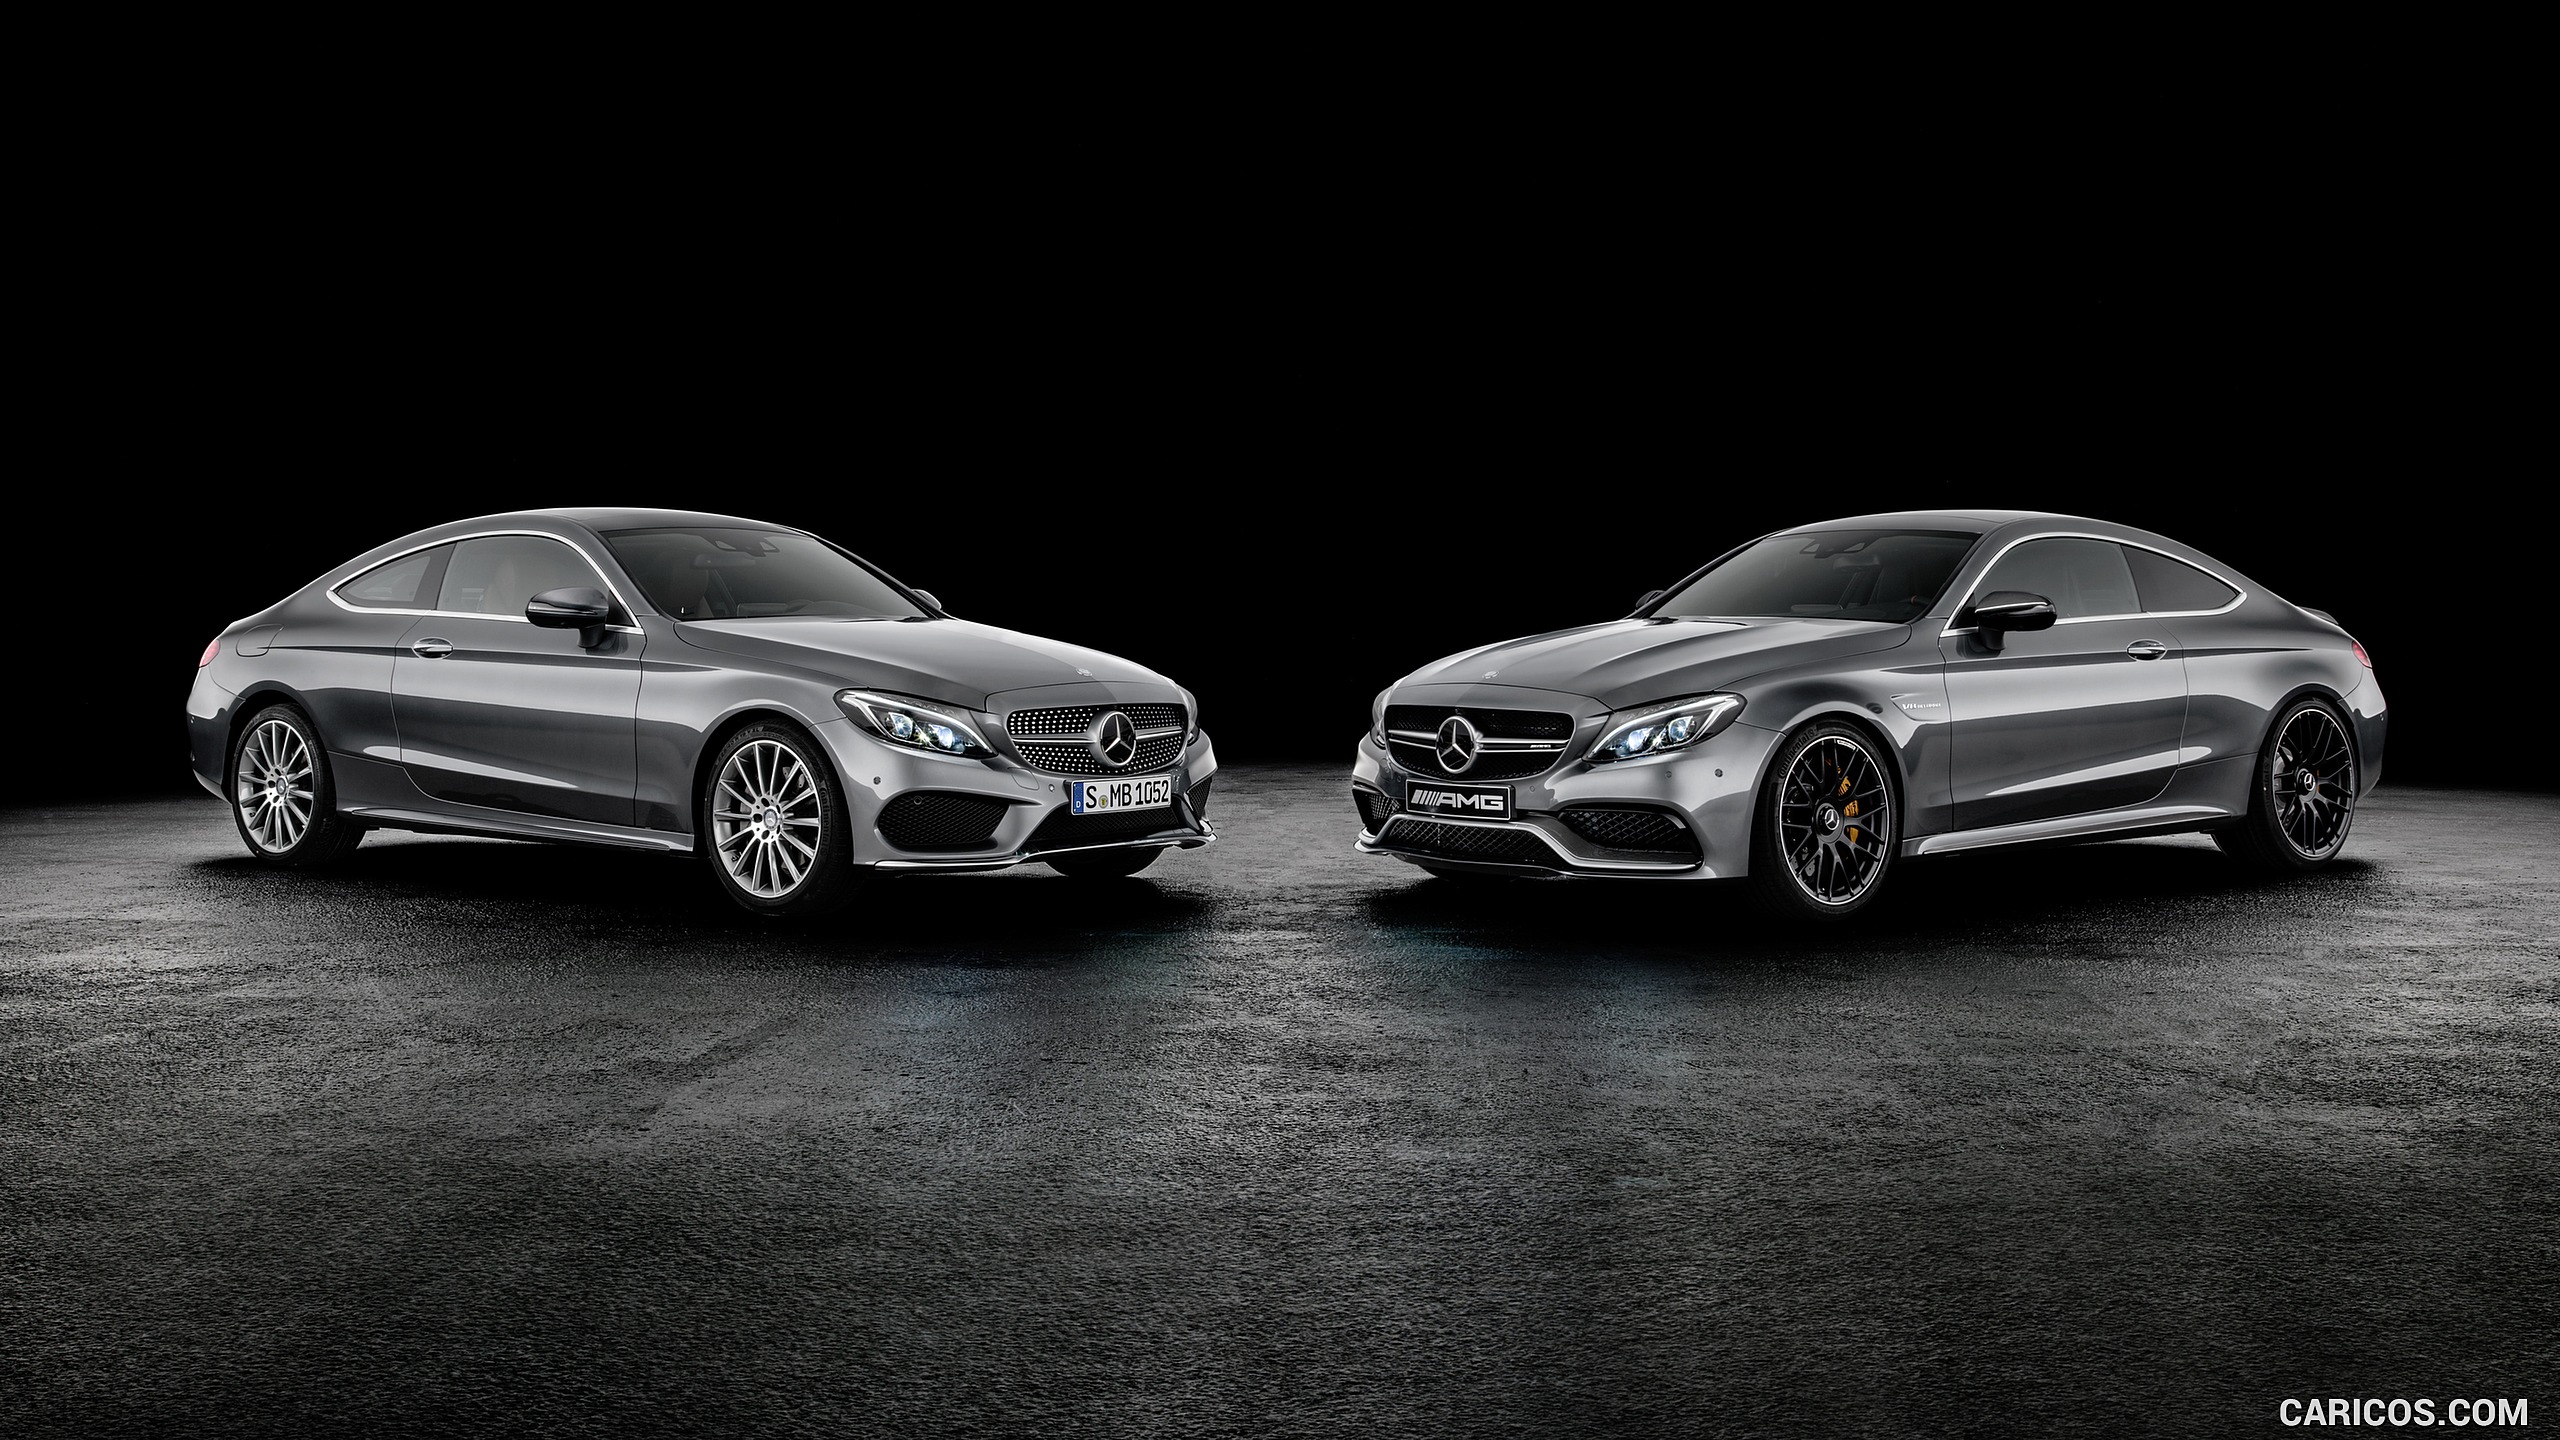 2017 Mercedes-Benz C-Class Coupe and C63 AMG Coupe - Front, #47 of 210